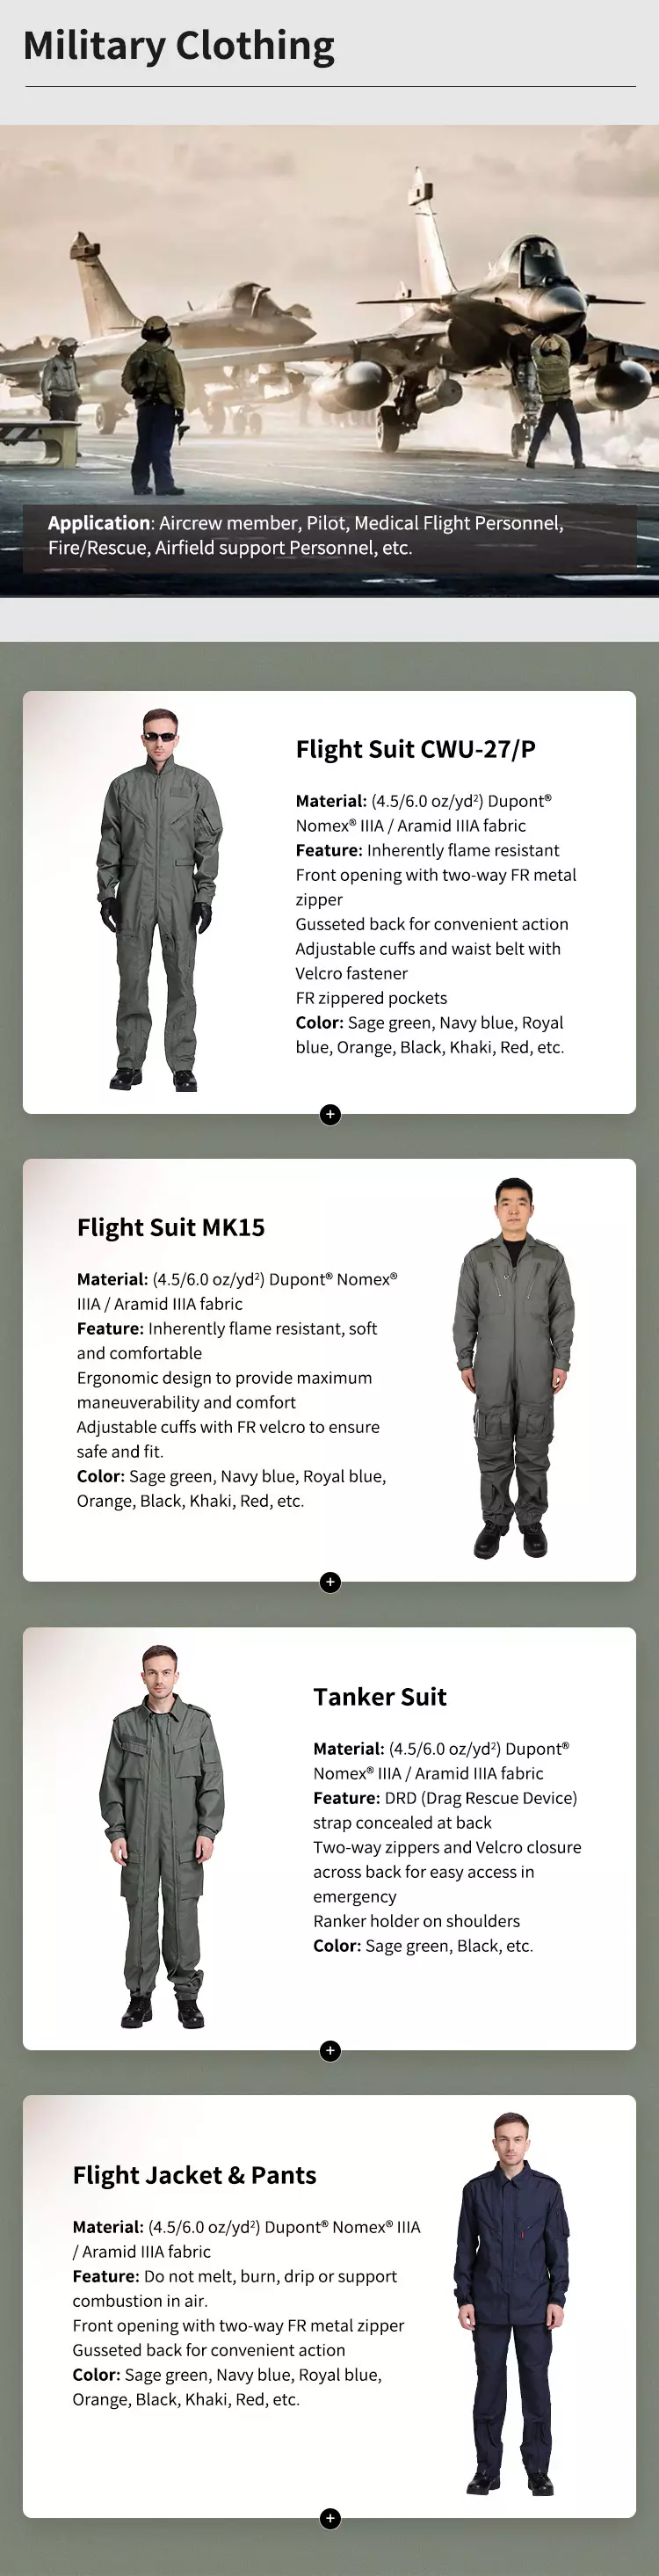 What is a military flight suit?